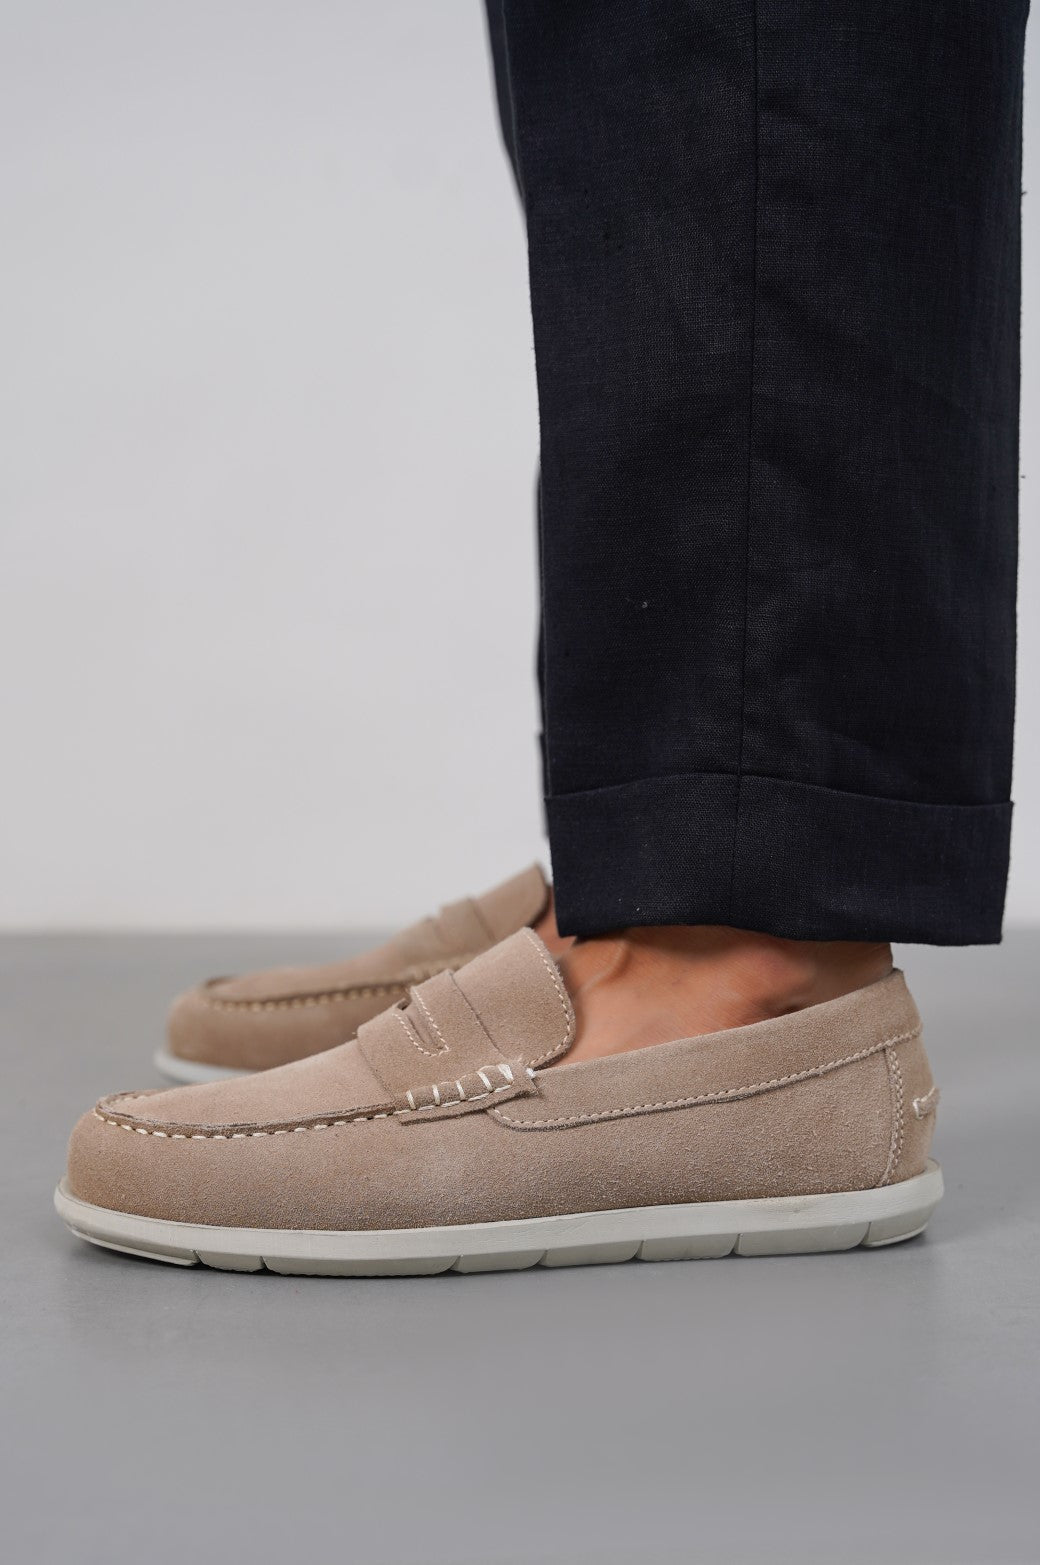 SAND LIGHTWEIGHT SUEDE LOAFERS